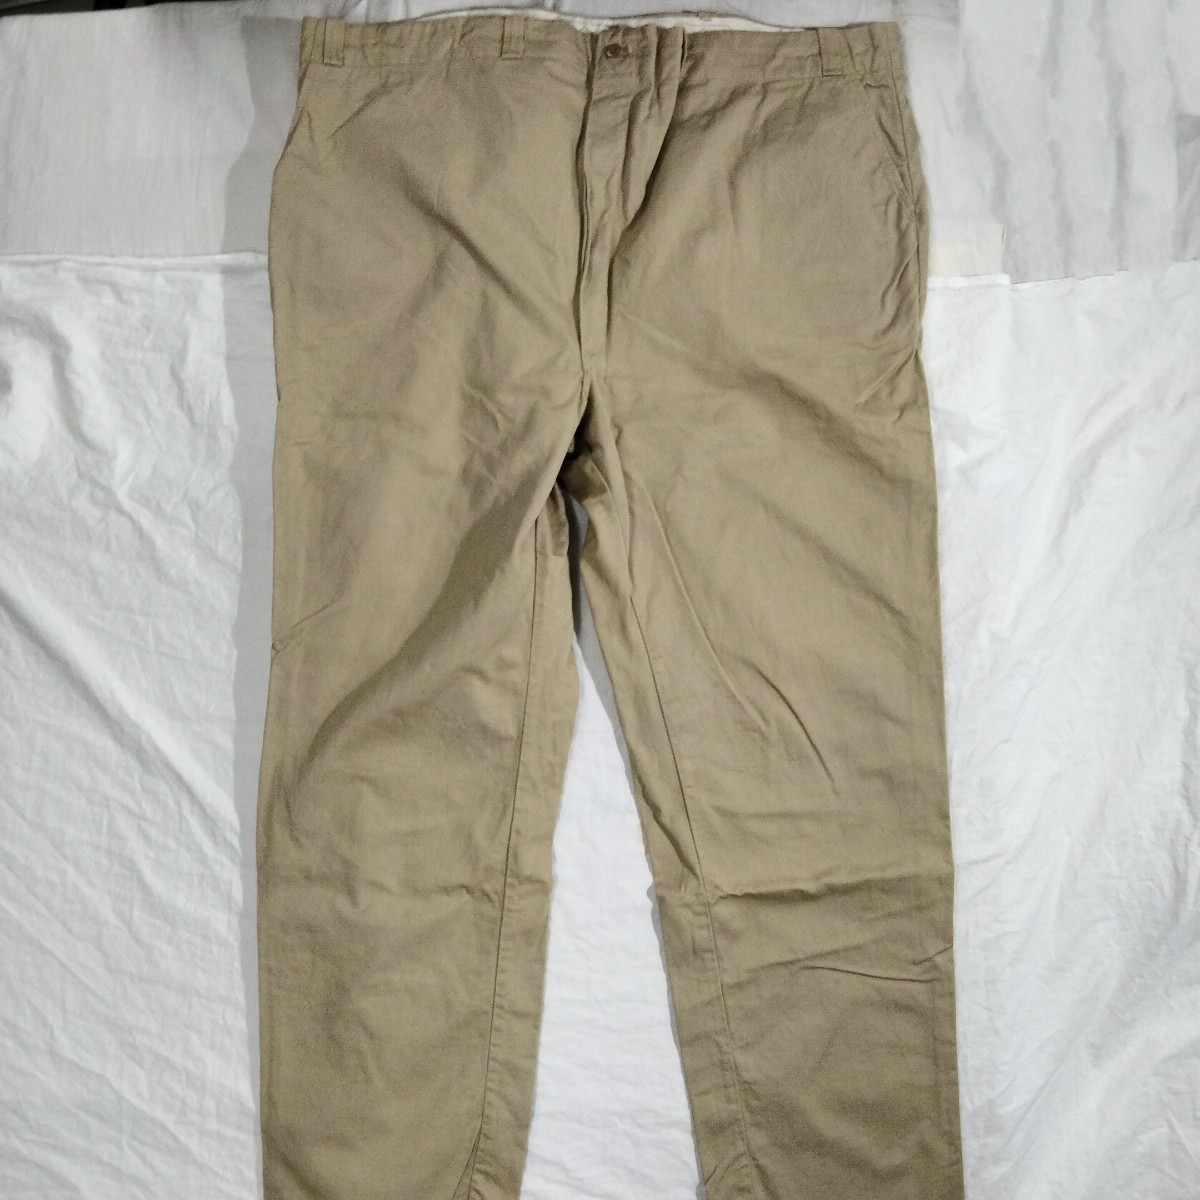 pacific overall Pacific overall button fly cotton chino trousers chinos Vintage vintage big 